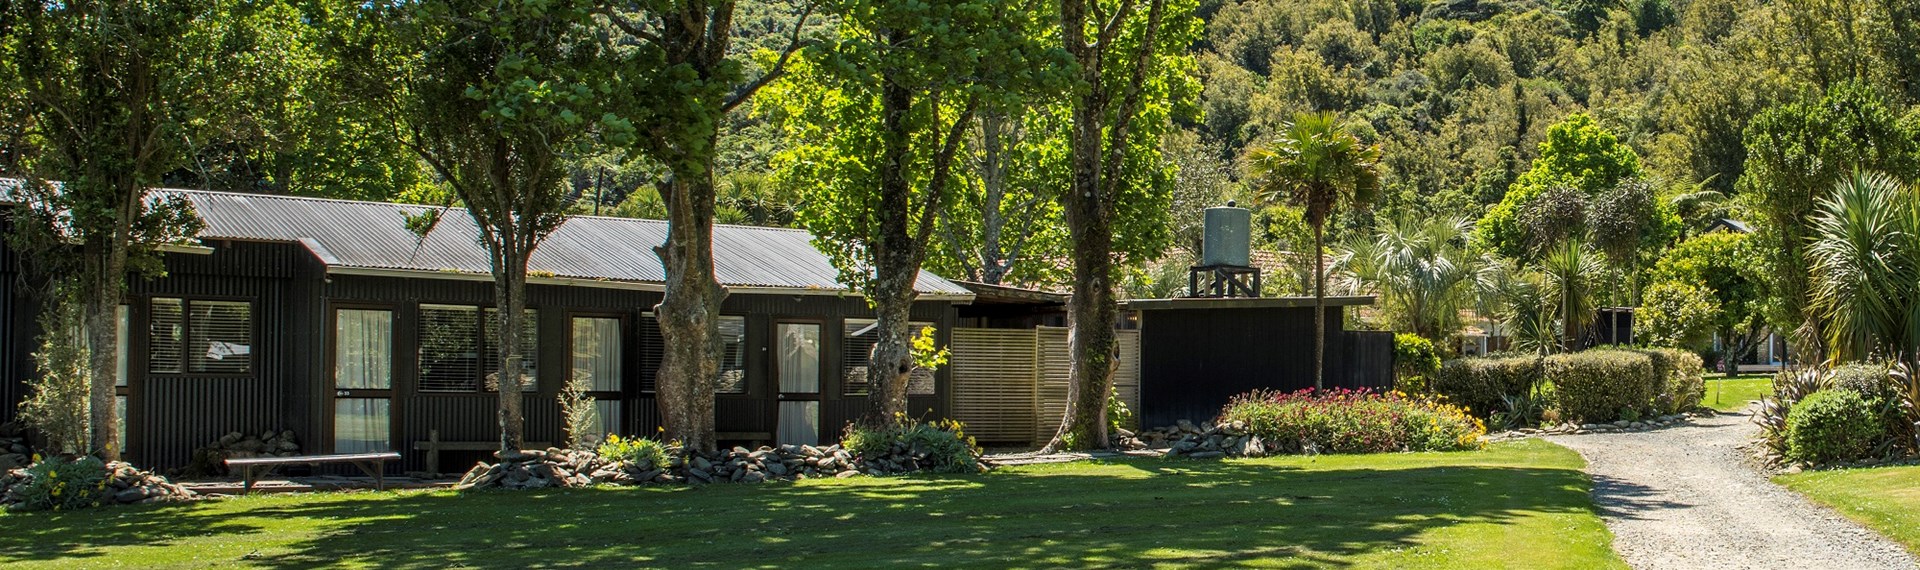 Hiker's Cabins surrounded by tall trees at Furneaux Lodge in the Marlborough Sounds, New Zealand.